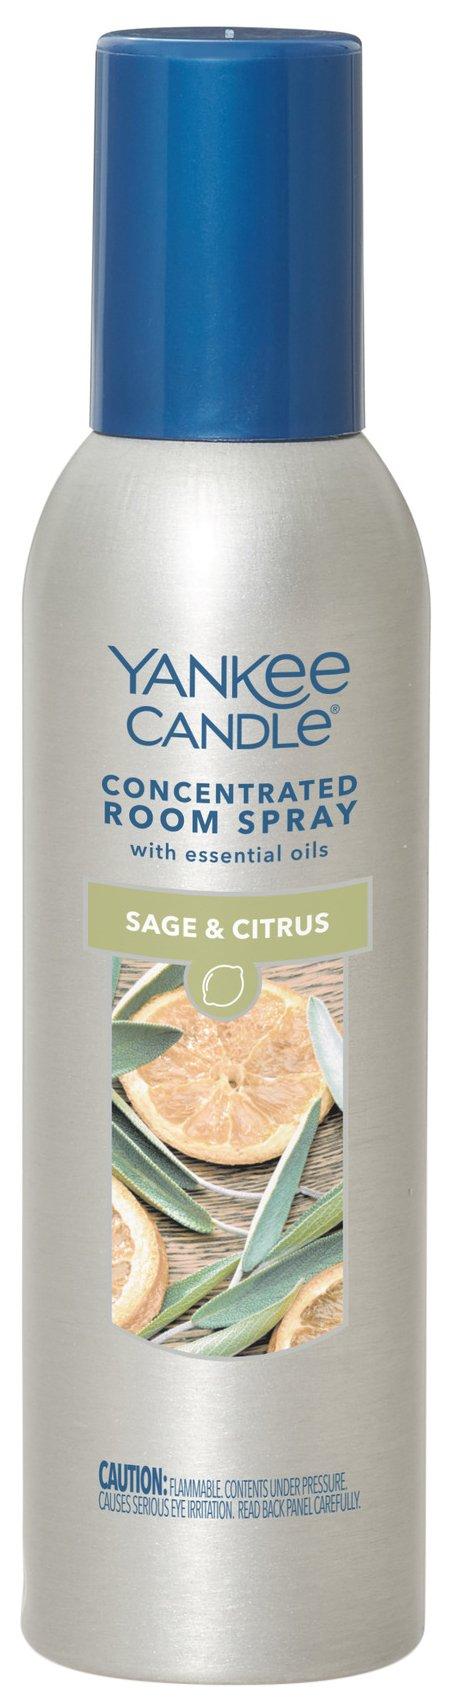 Sage and Citrus Concentrated Room Spray